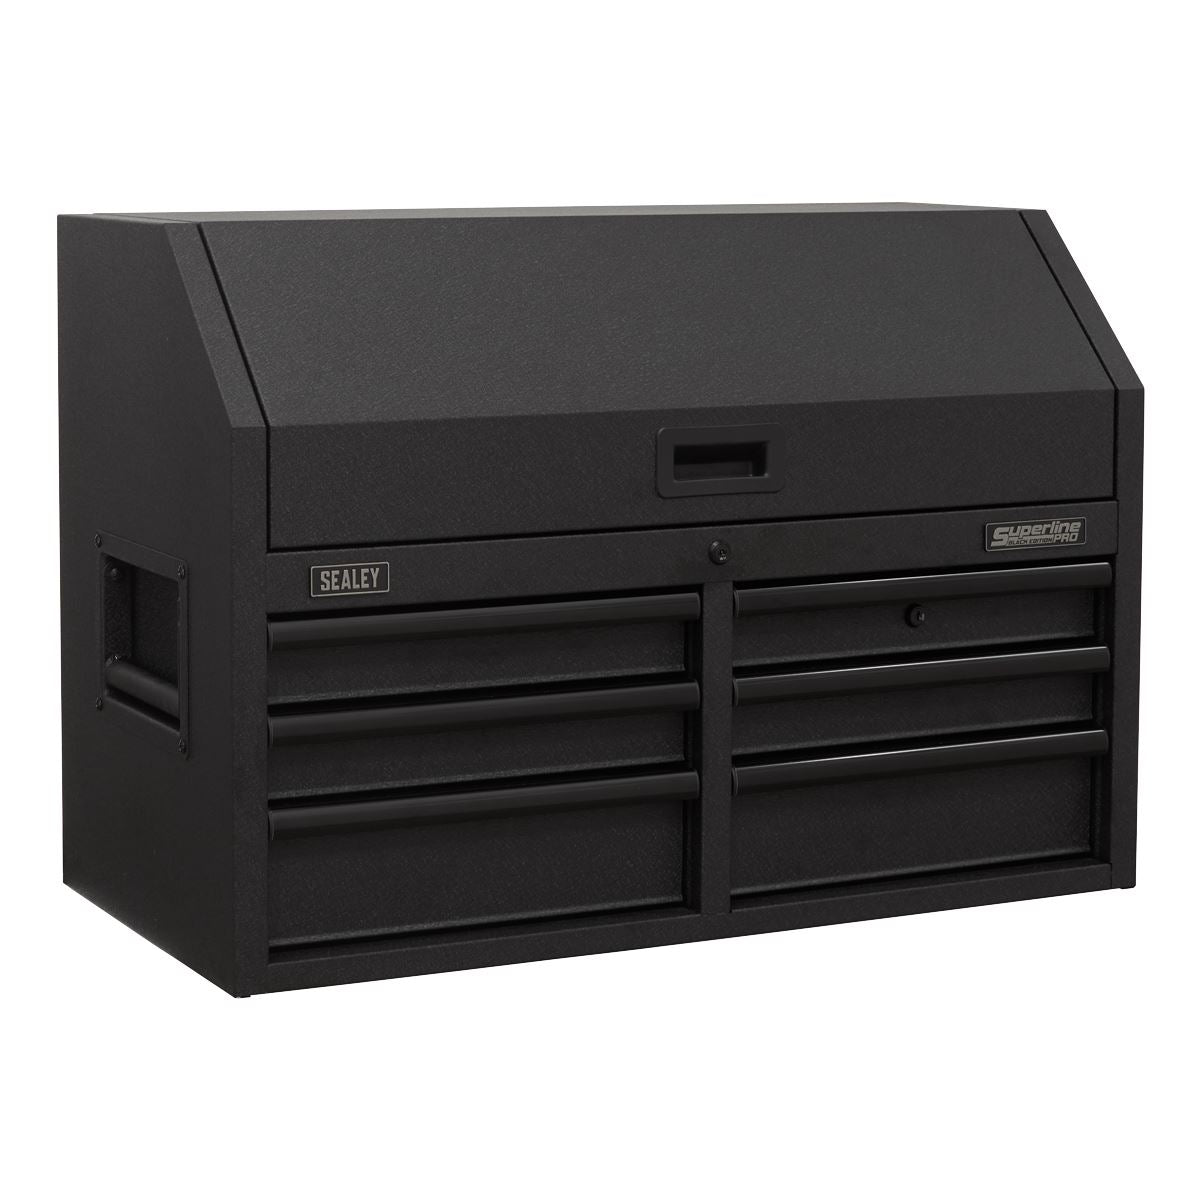 Sealey Superline Pro Topchest 6 Drawer 910mm with Soft Close Drawers & Power Strip